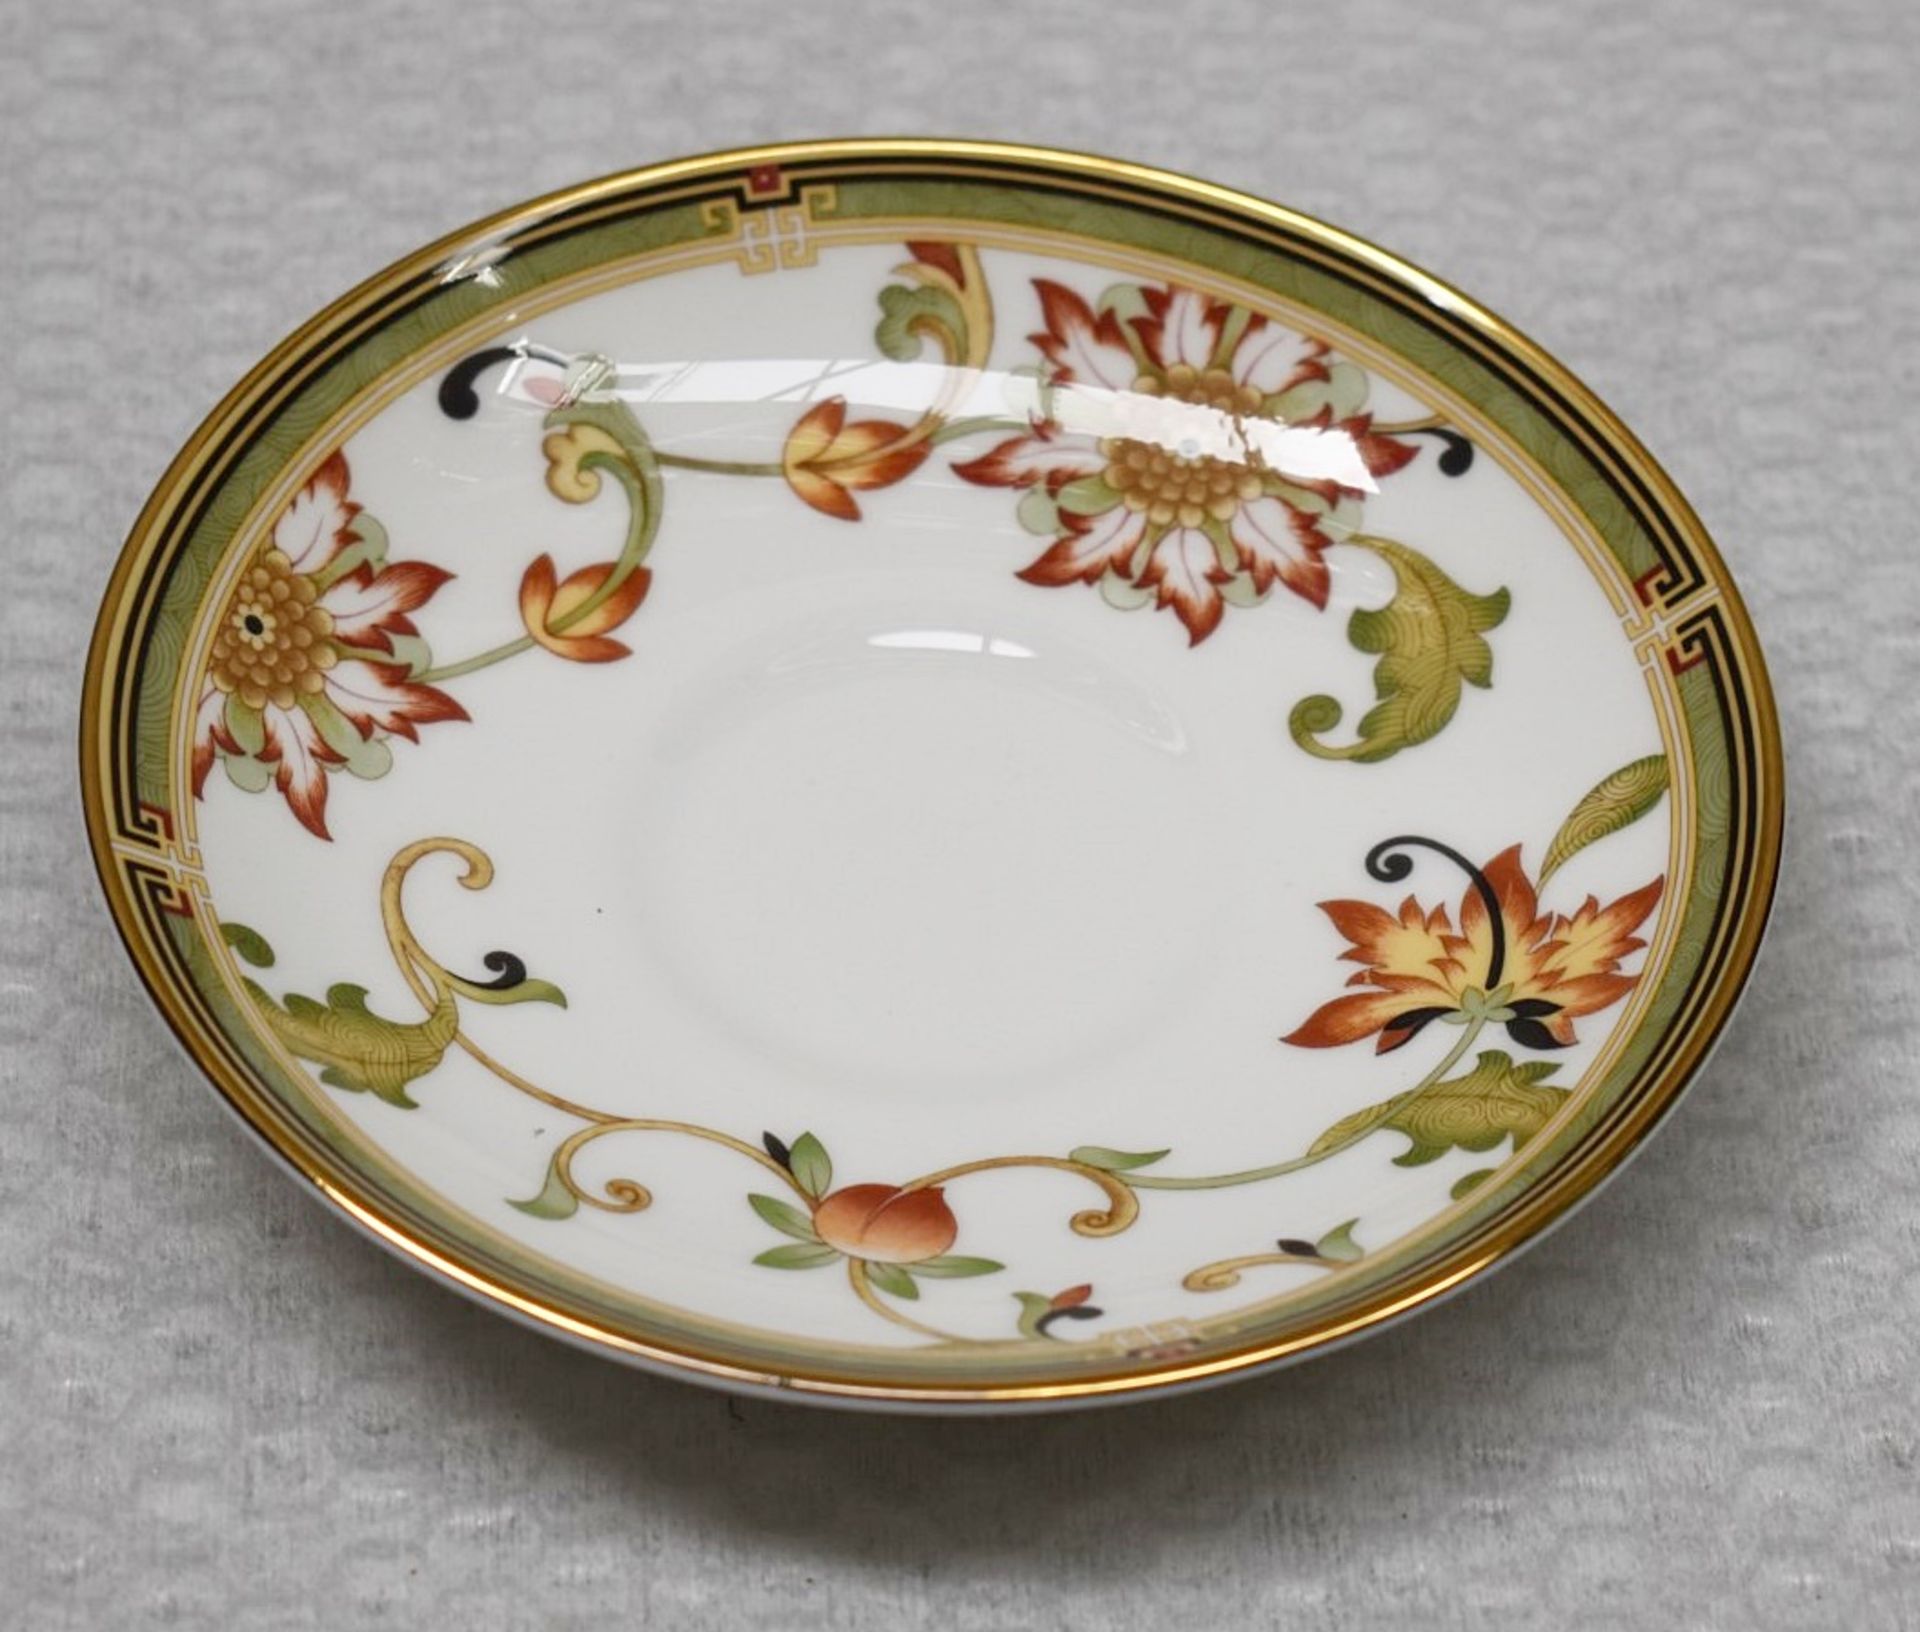 1 x WEDGWOOD 'Oberon Leigh Flora' Fine Bone China Gold Rimmed Tea Saucer / Trinket Dish - Unboxed - Image 2 of 5